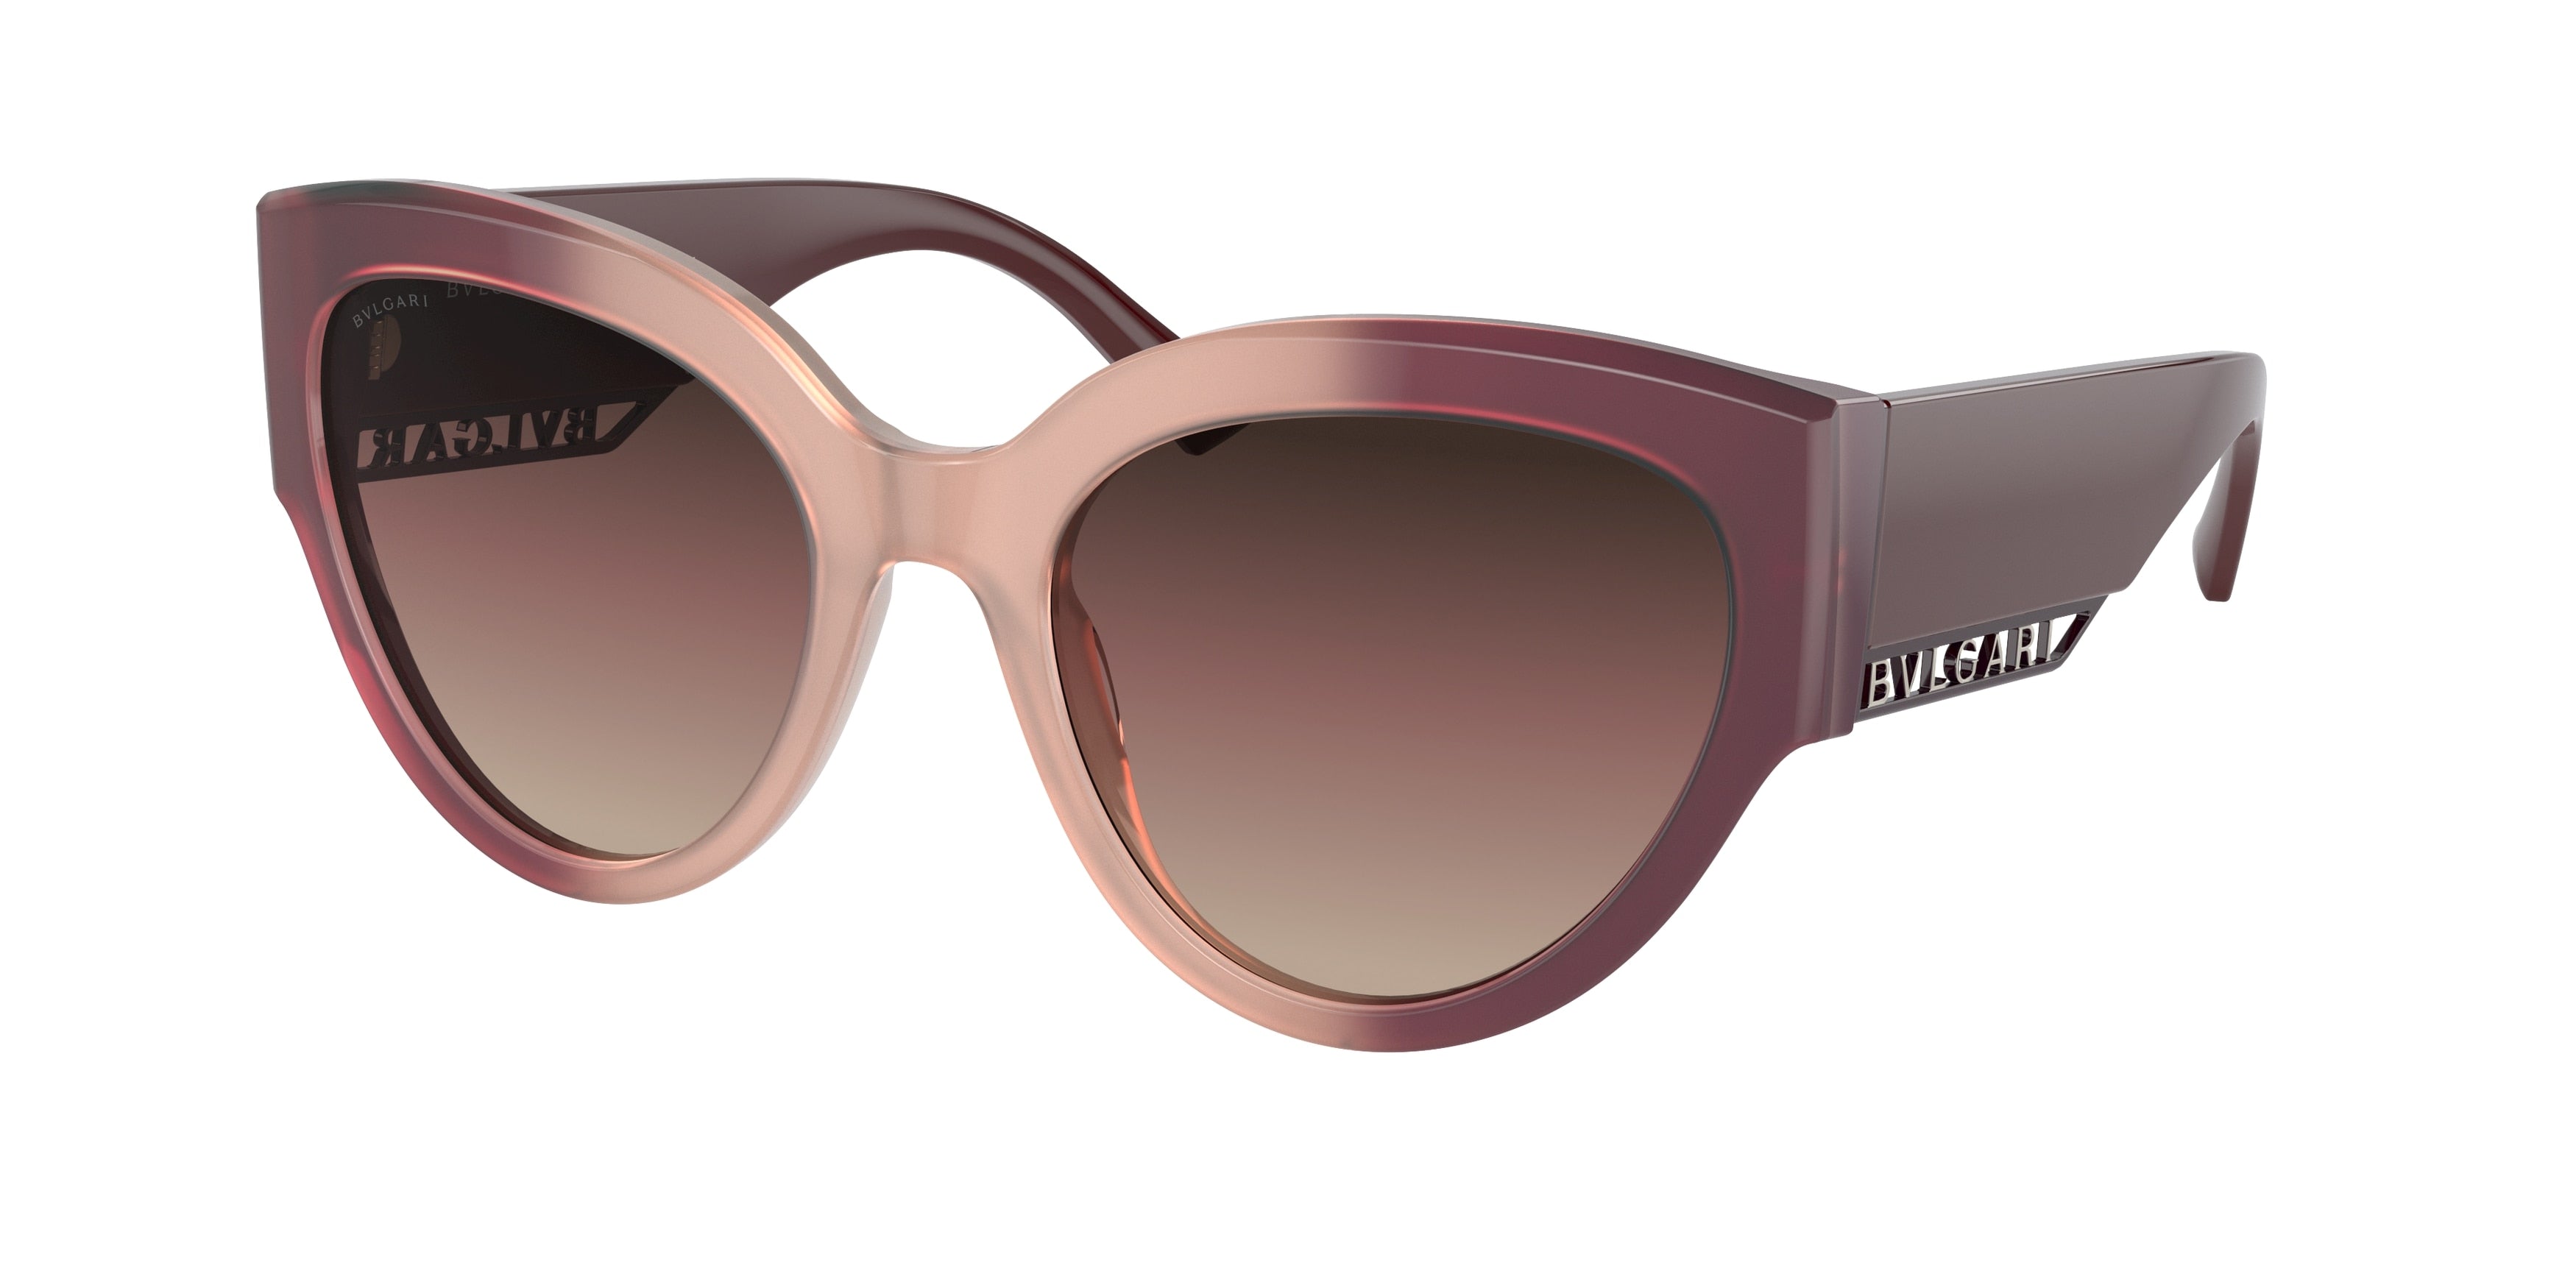 Bvlgari BV8258 Butterfly Sunglasses  5524E2-Bordeaux Gradient Pink 55-140-20 - Color Map Red